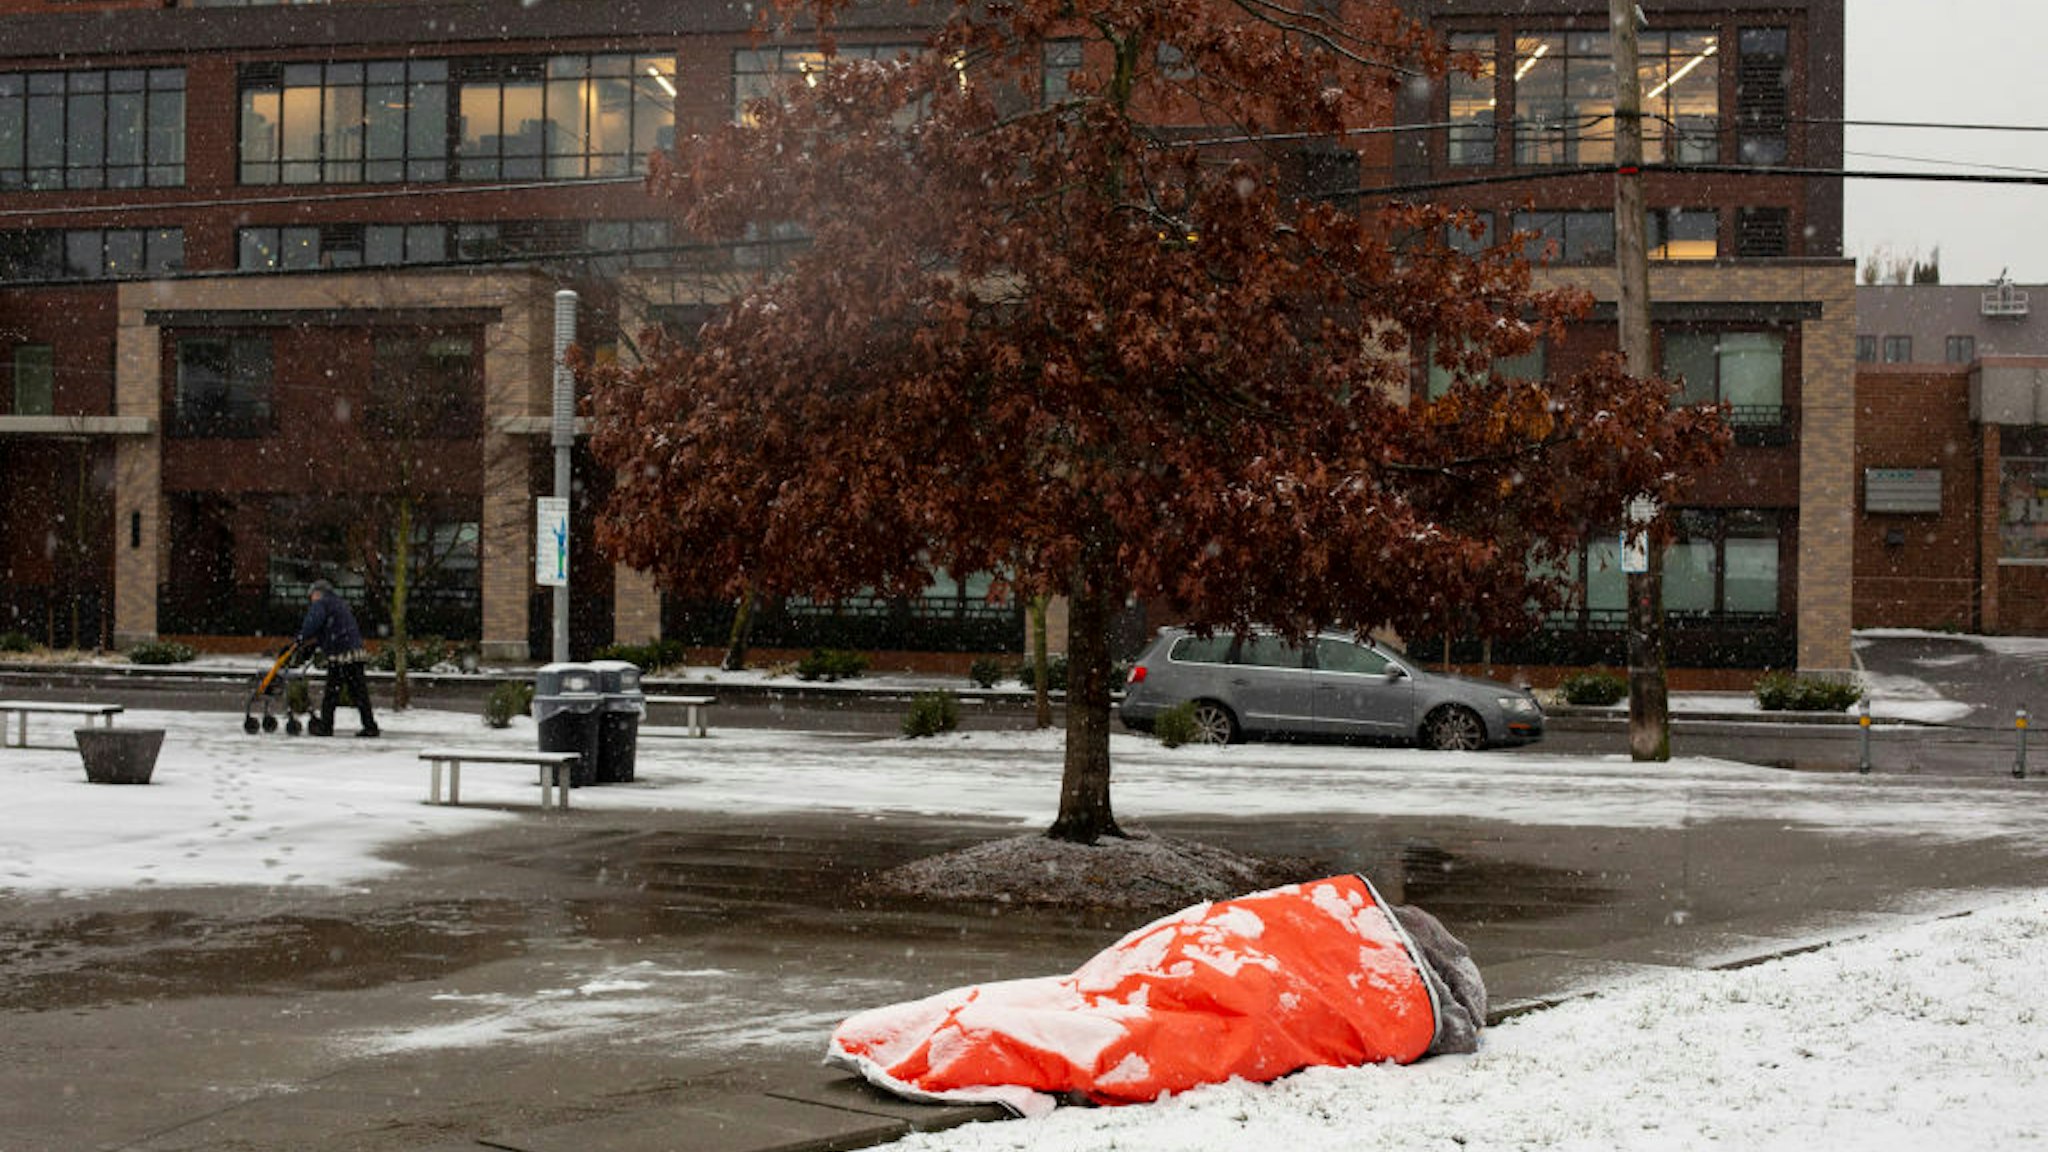 A homeless man, who said he was aware of the forecast for extreme weather, rests in a park while covered with snow on February 8, 2019 in Seattle, Washington.